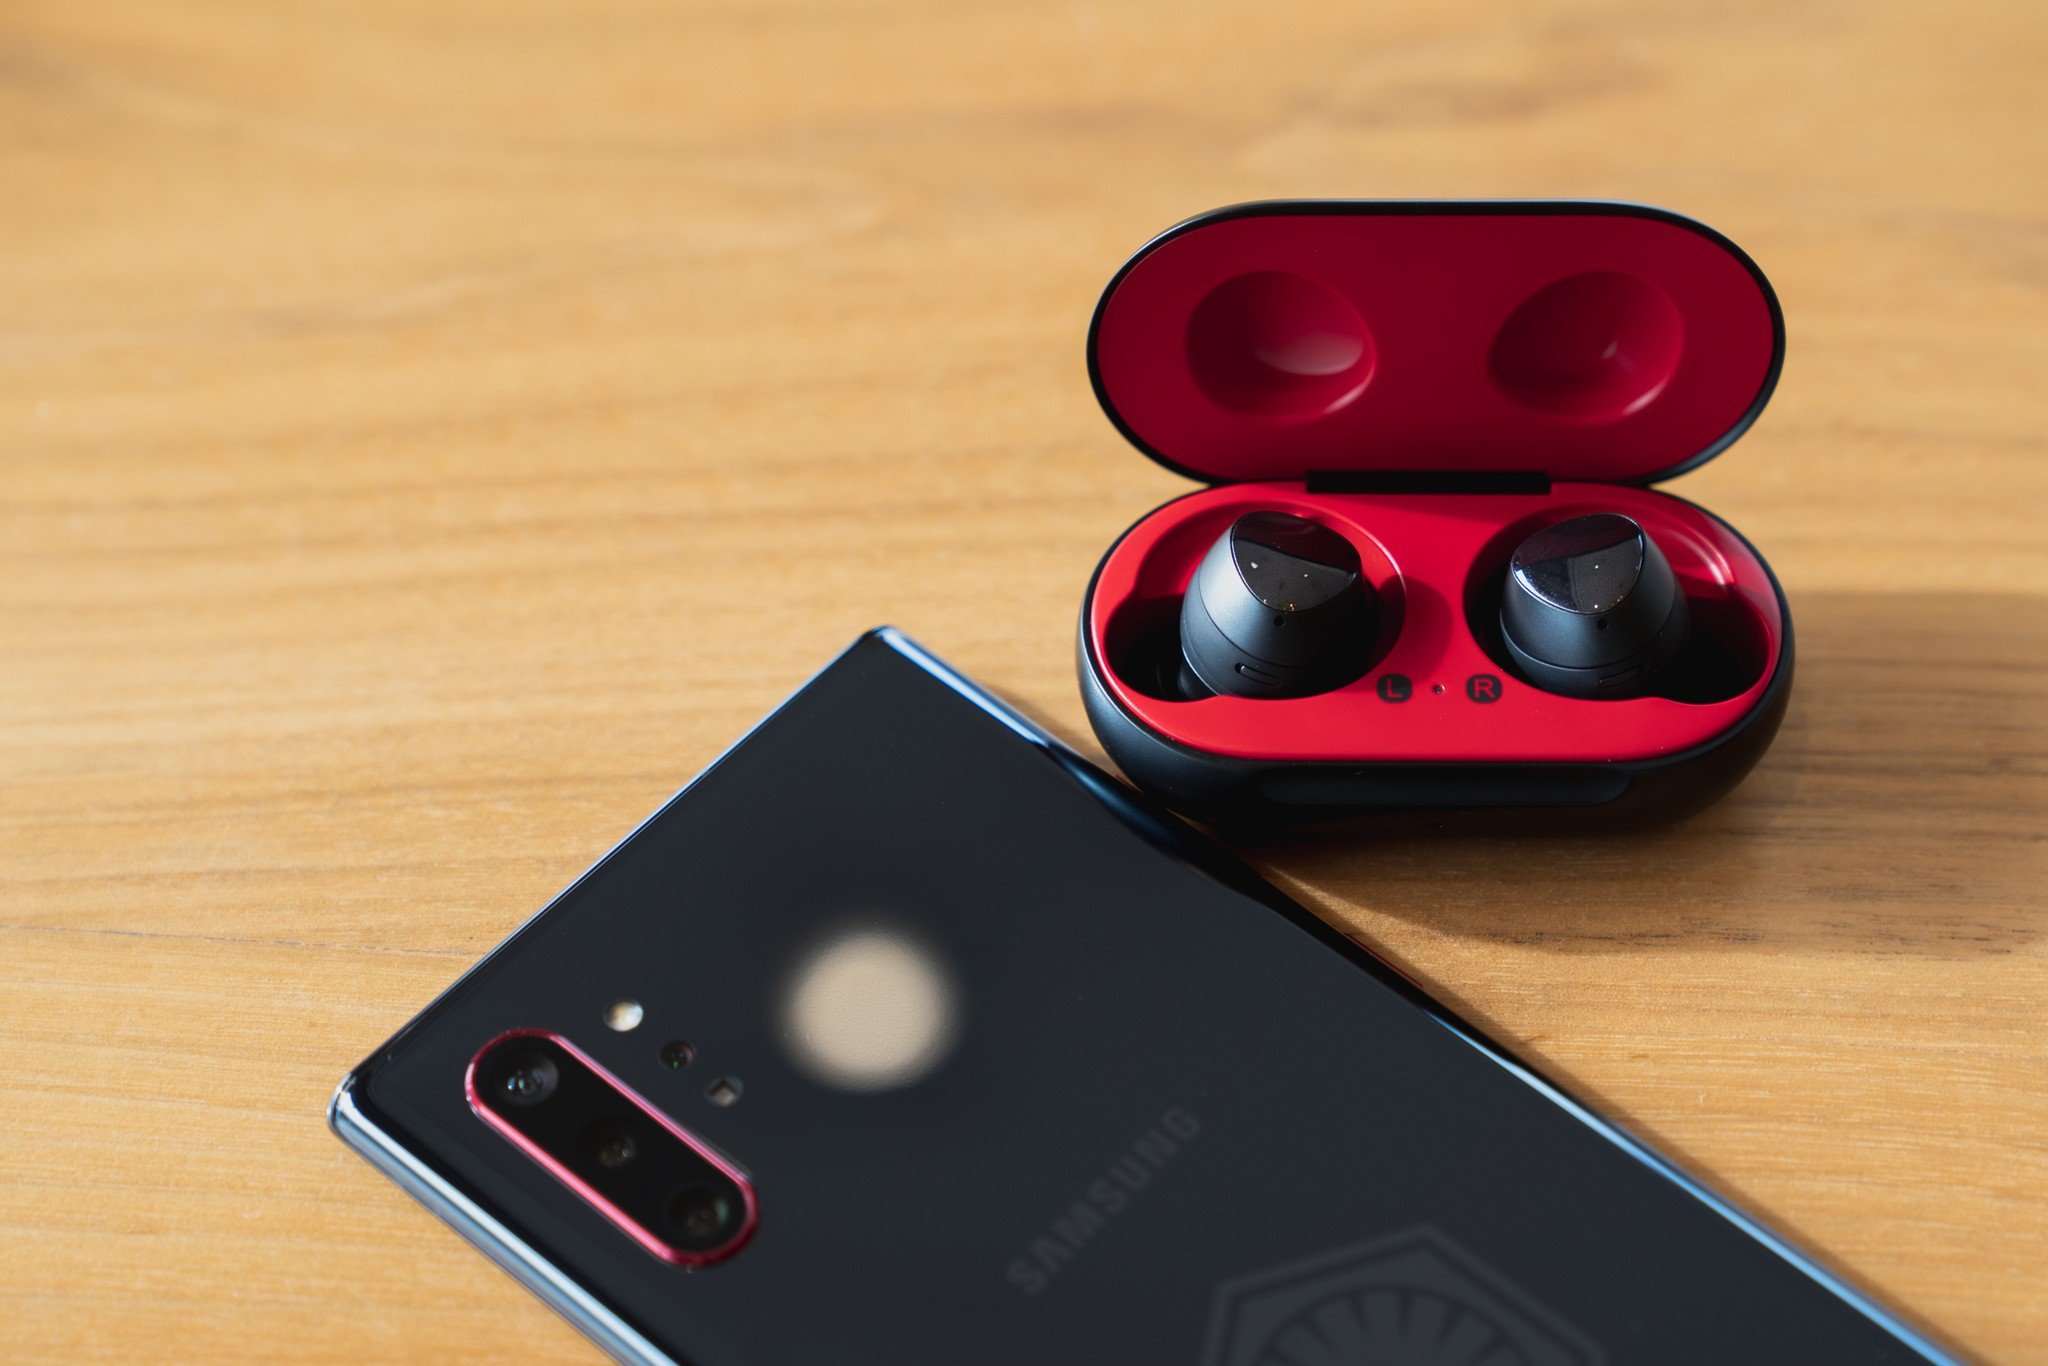 Special edition Galaxy Buds and the Galaxy Note 10+ Star Wars Edition